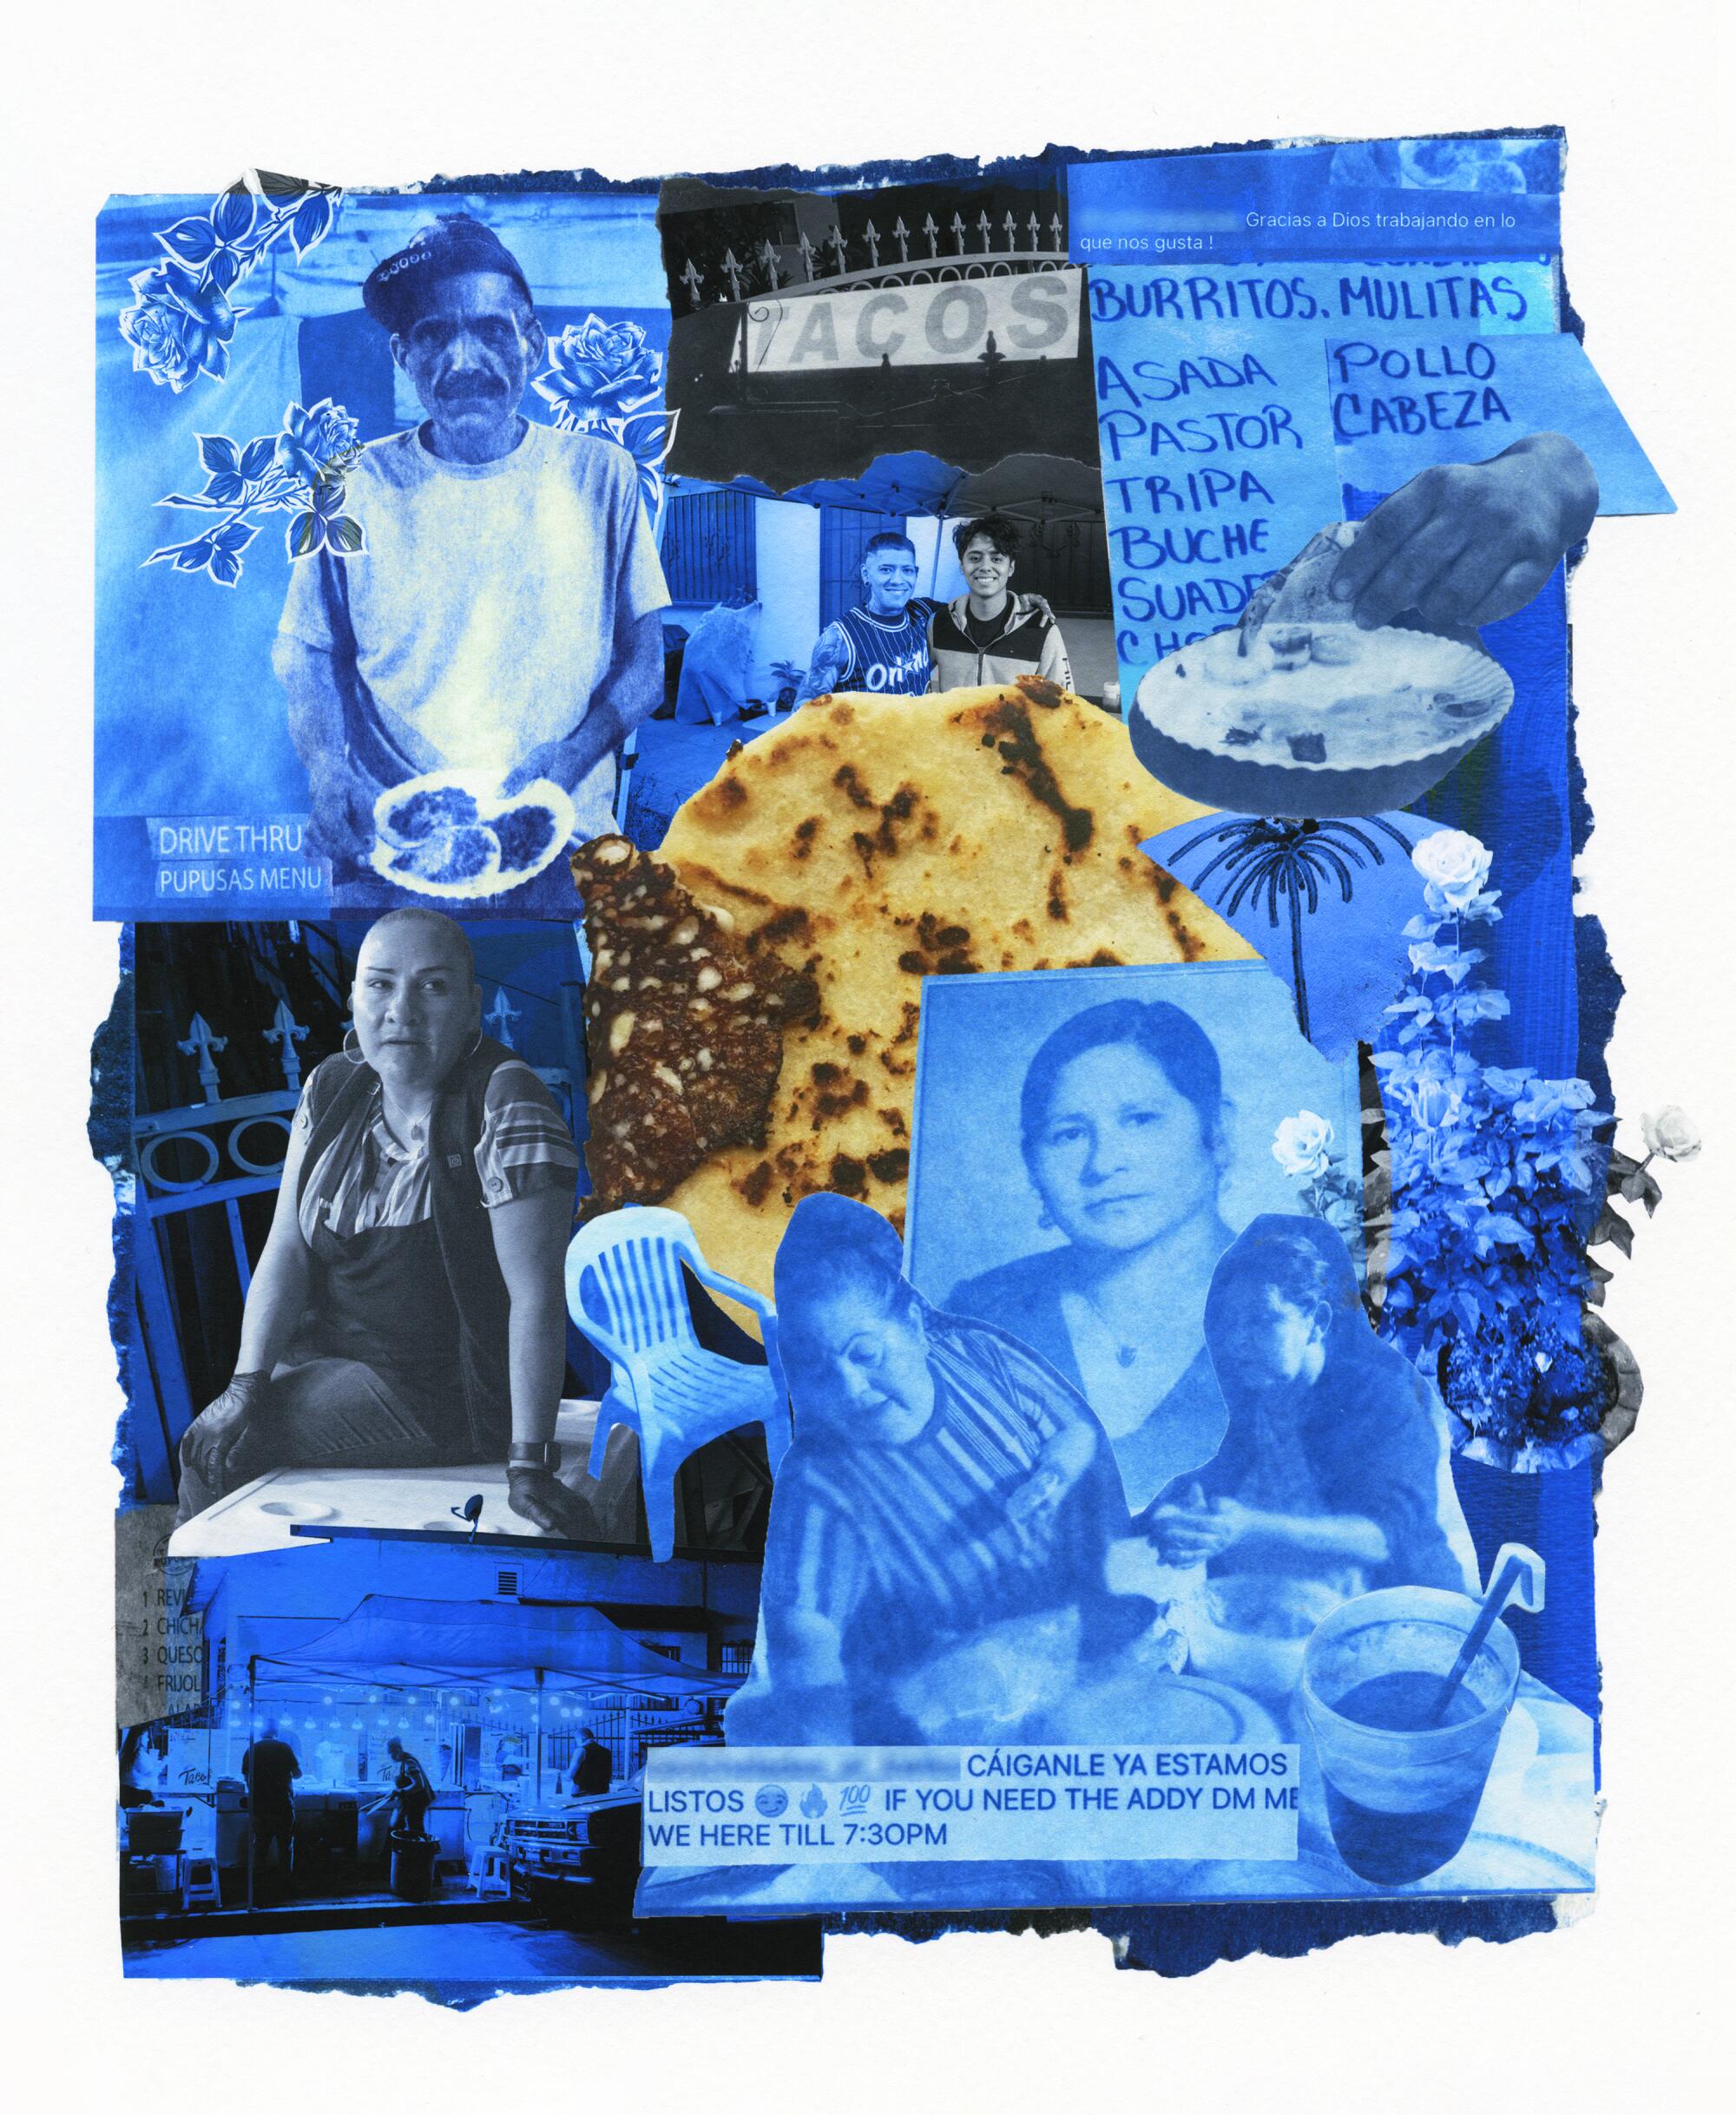 cyanotype prints and digital photography collage depicting food being sold from people’s homes